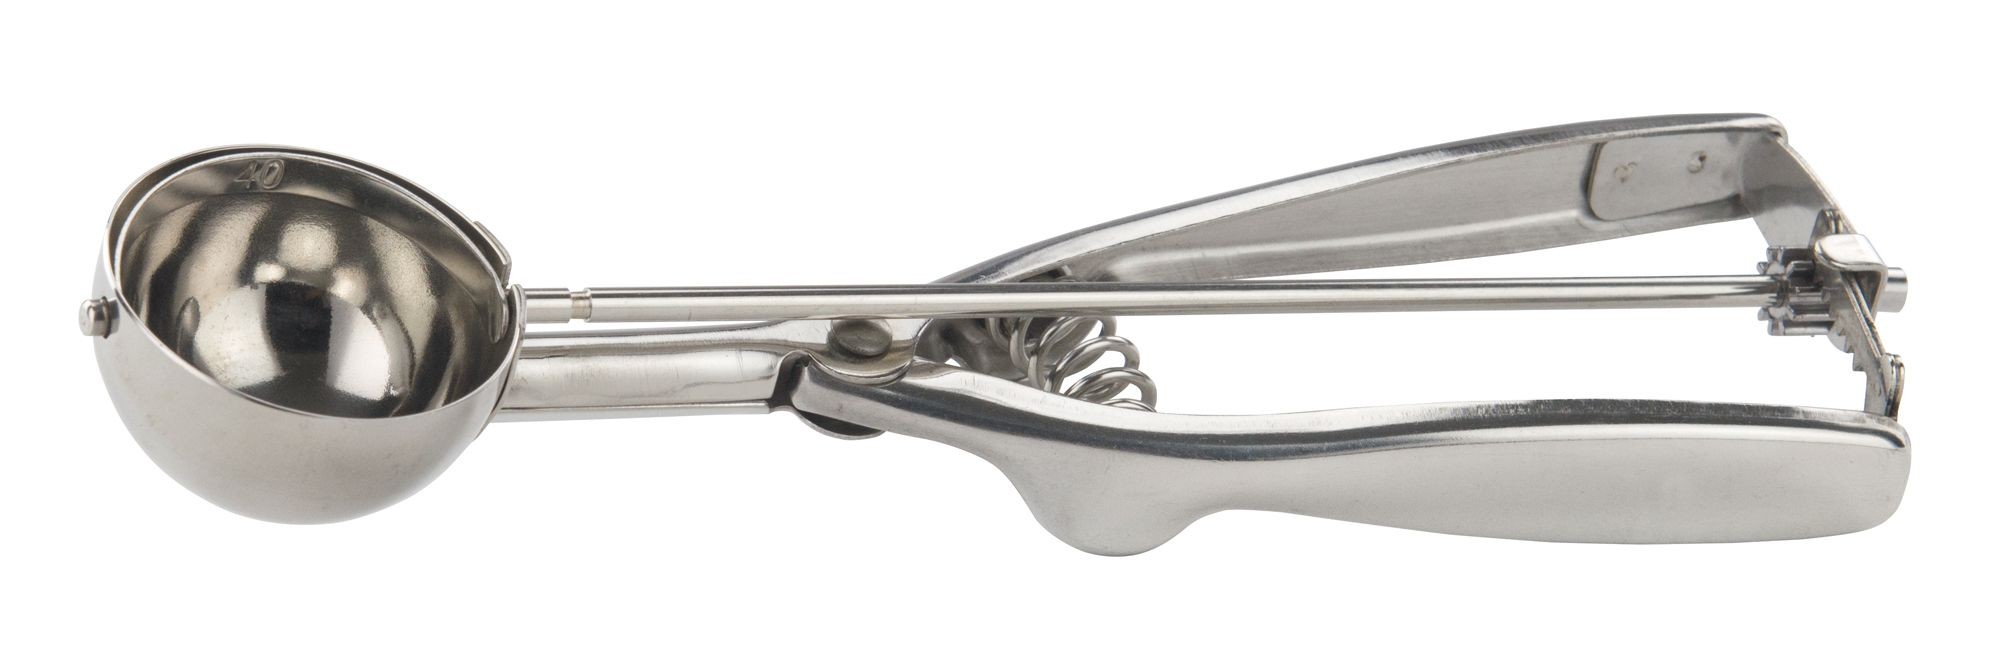 Winco ISS-40 Stainless Steel 7/8 oz. Disher/Portioner, Size 40